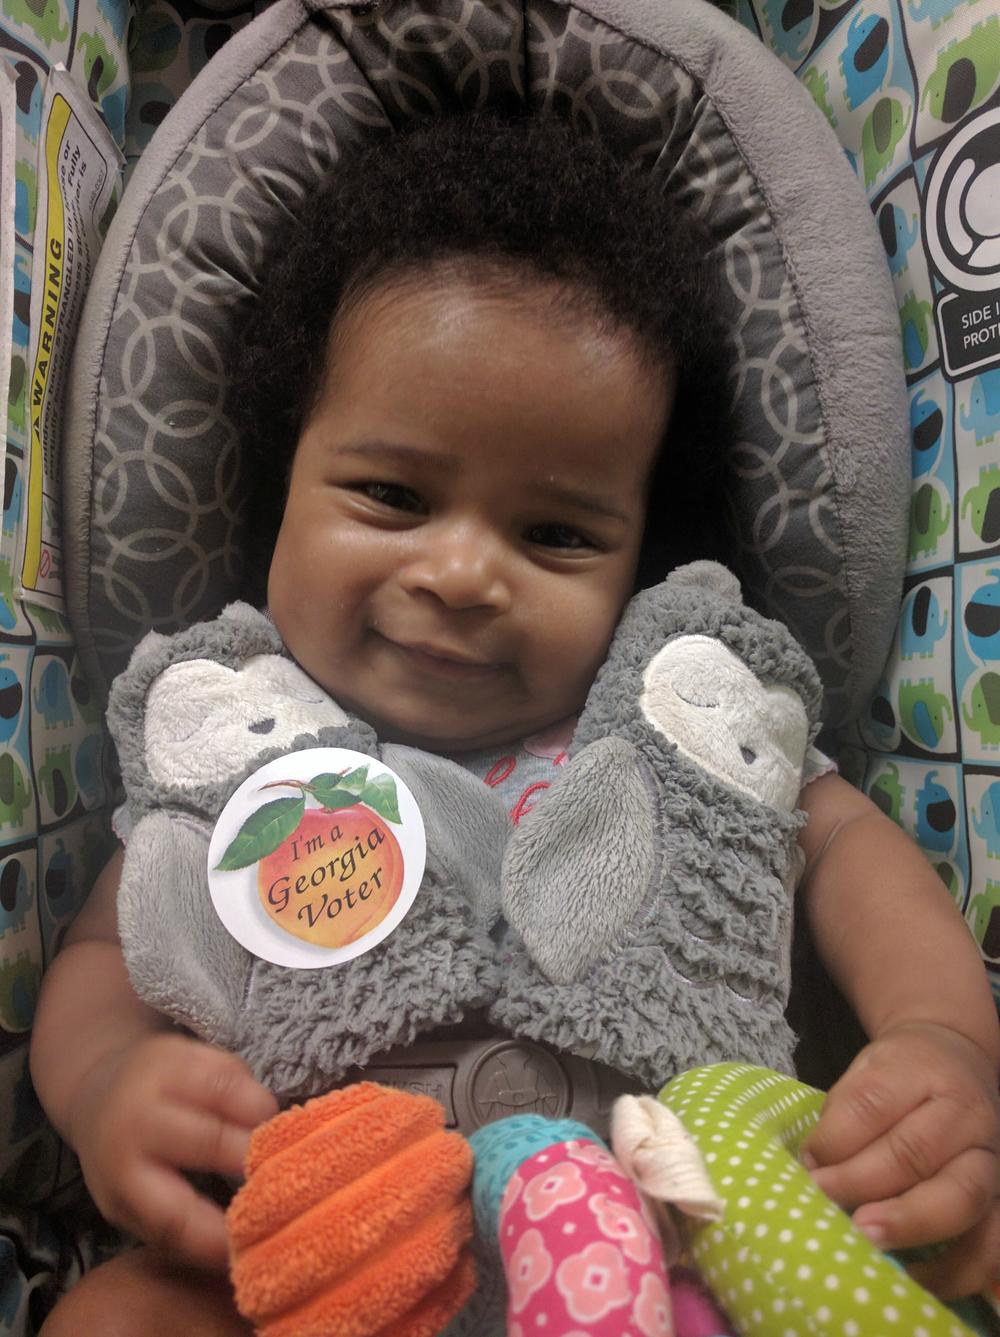 Even babies get in on the voting sticker action on Election Day.